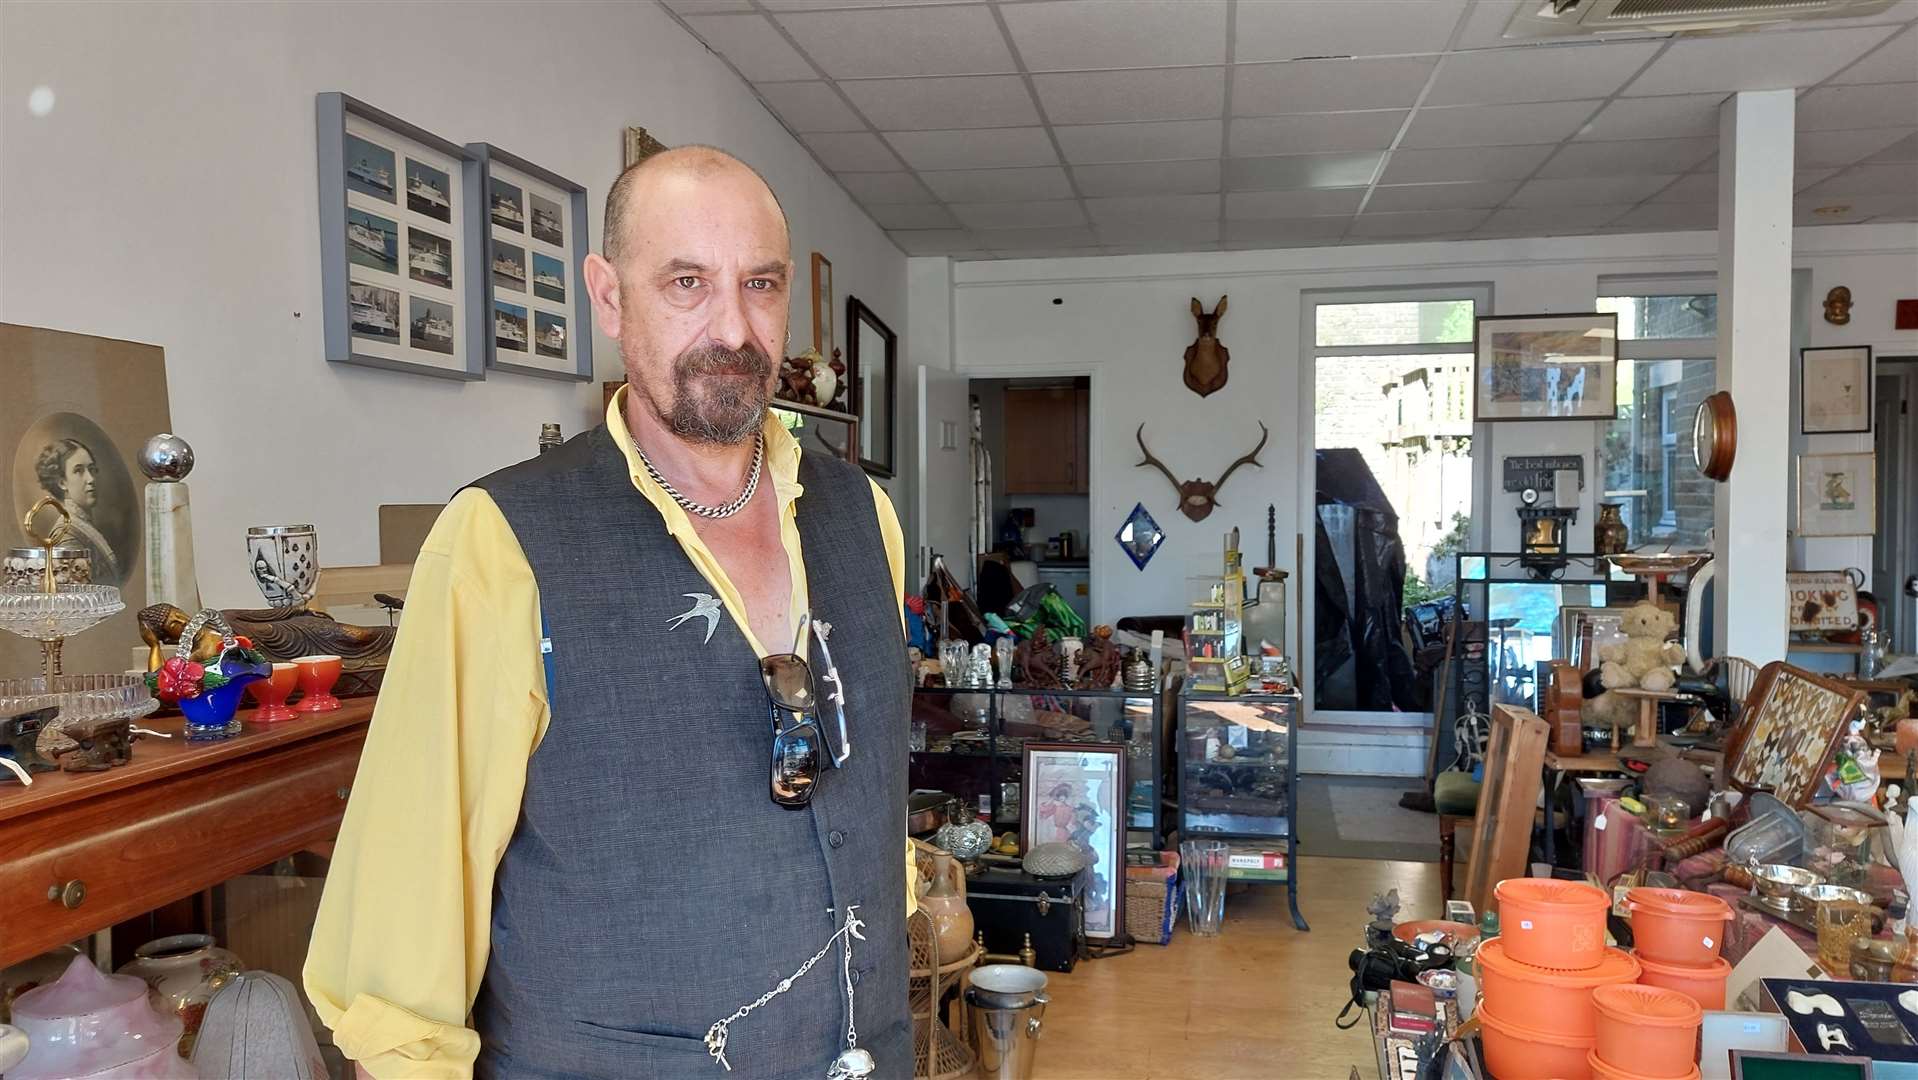 Robin Burkhardt, who owns the Old Curiosity Shop, has started a petition